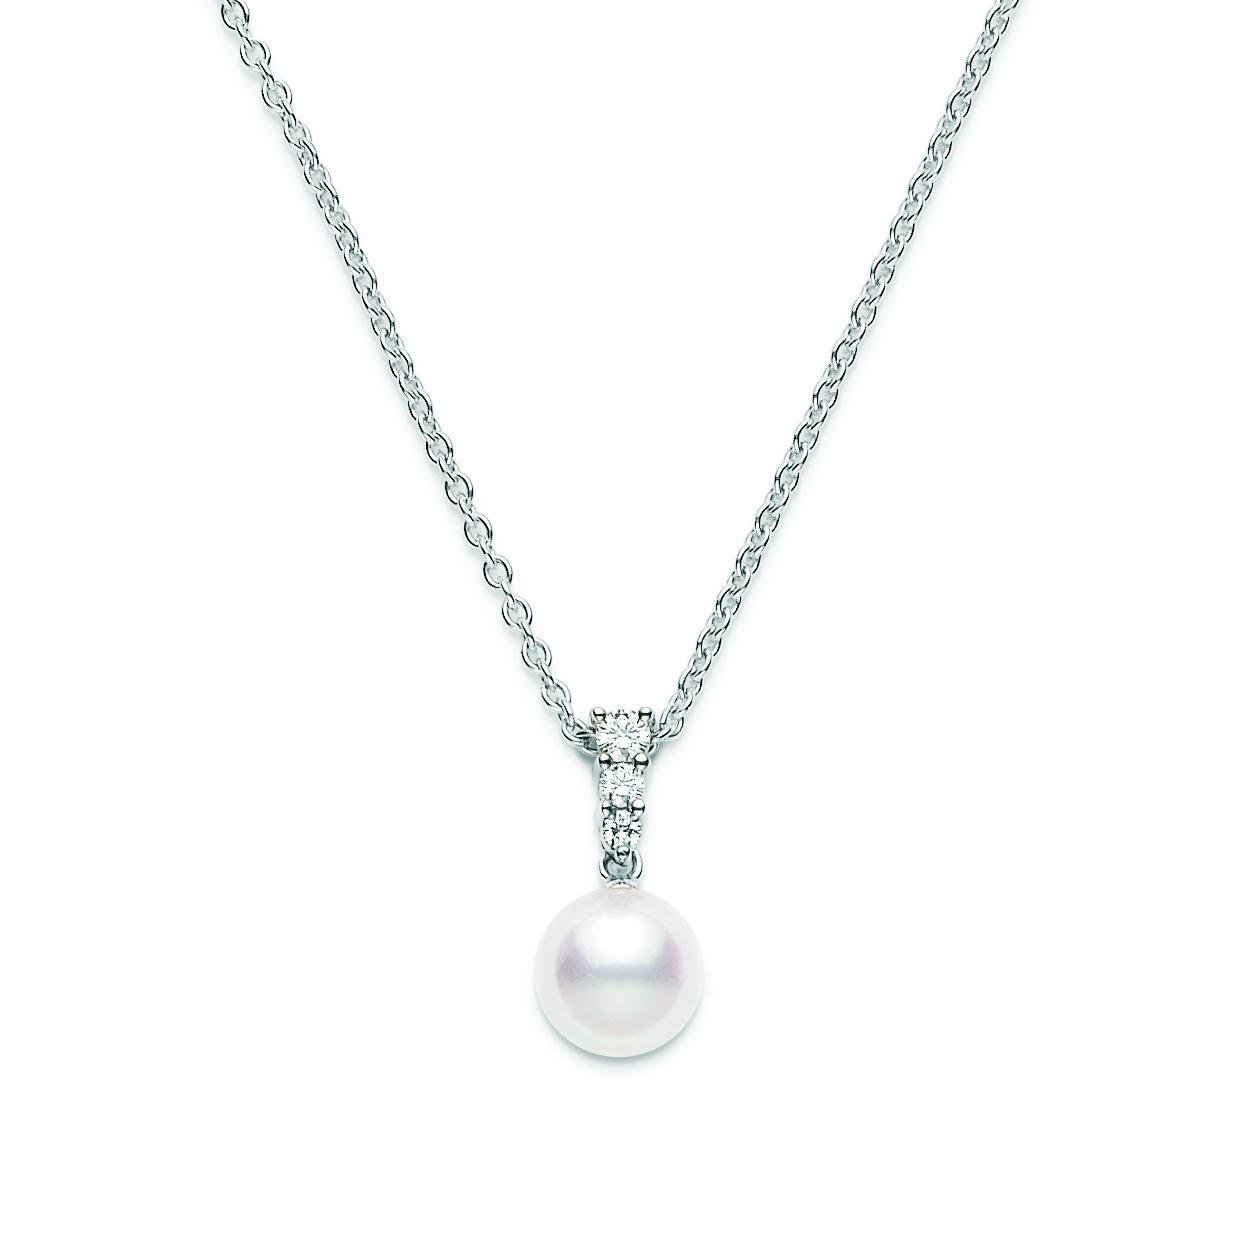 Mikimoto Morning Dew 8mm Akoya Cultured Pearl Necklace with Diamonds